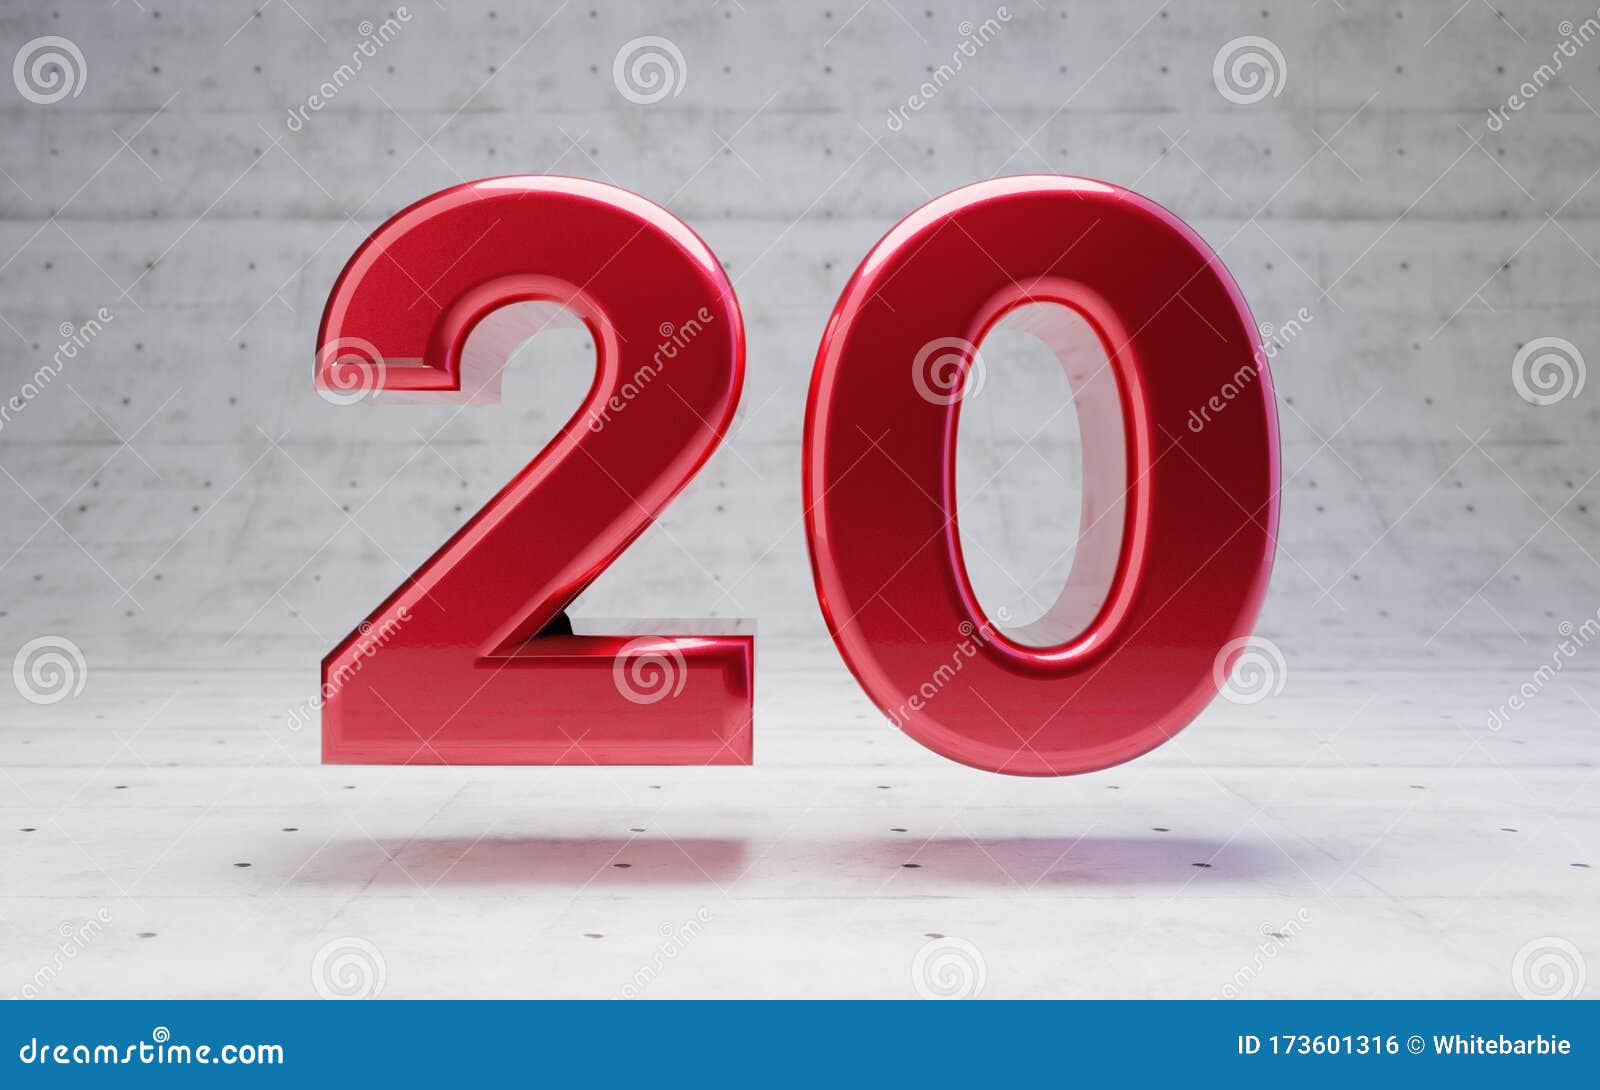 Red Number 20. Metallic Red Color Digit Isolated on Concrete Background ...